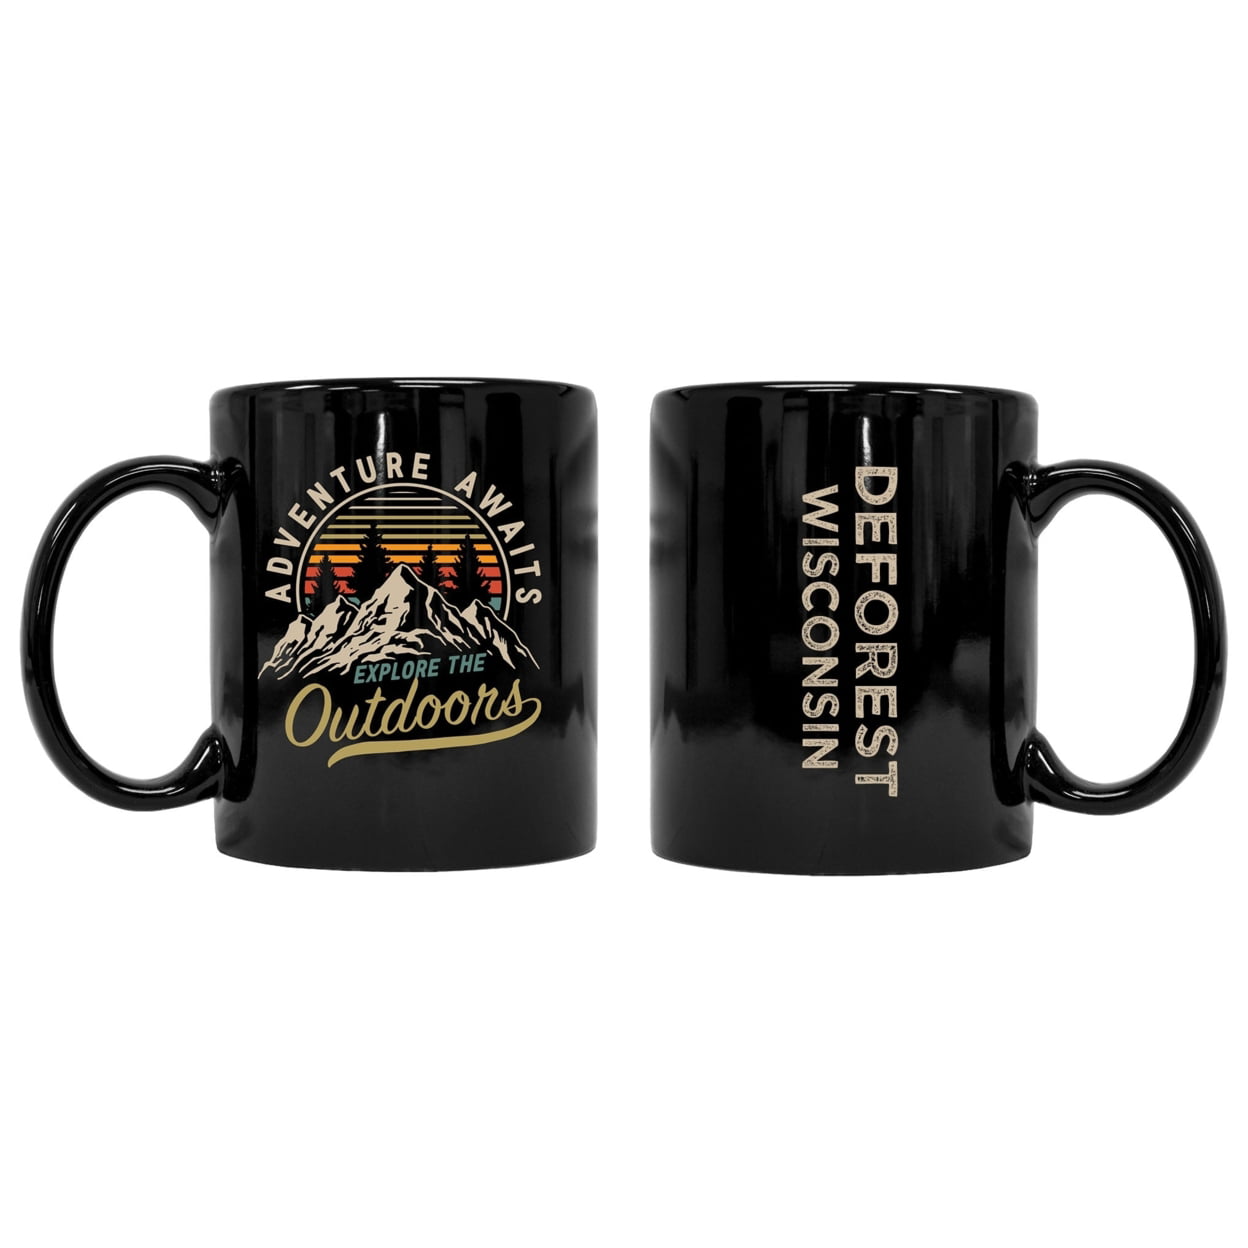 Unbreakable Different- Print Coffee Mug With Handle, Great Gift For  Anyone-Special